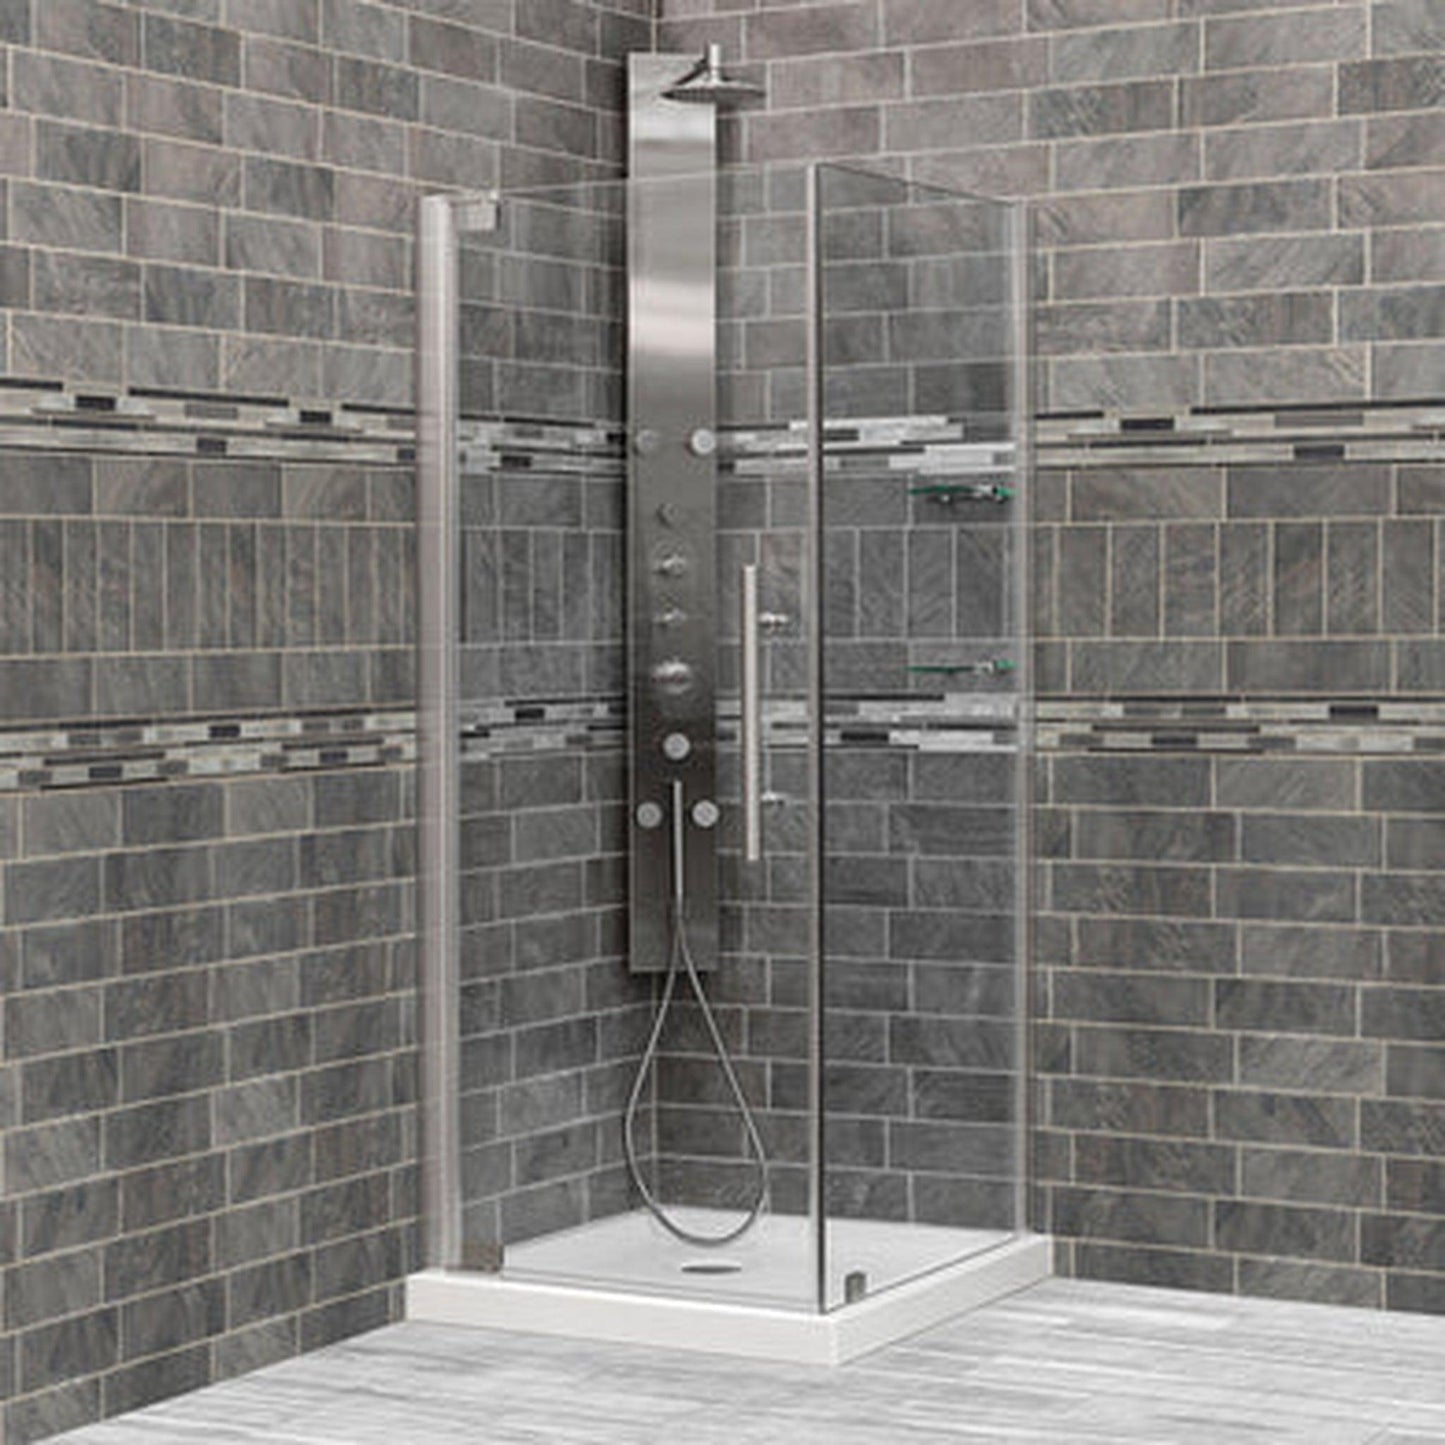 LessCare Ultra-G 34 3/8-35" x 72" x 29-30" Chrome Swing-Out Shower Enclosure